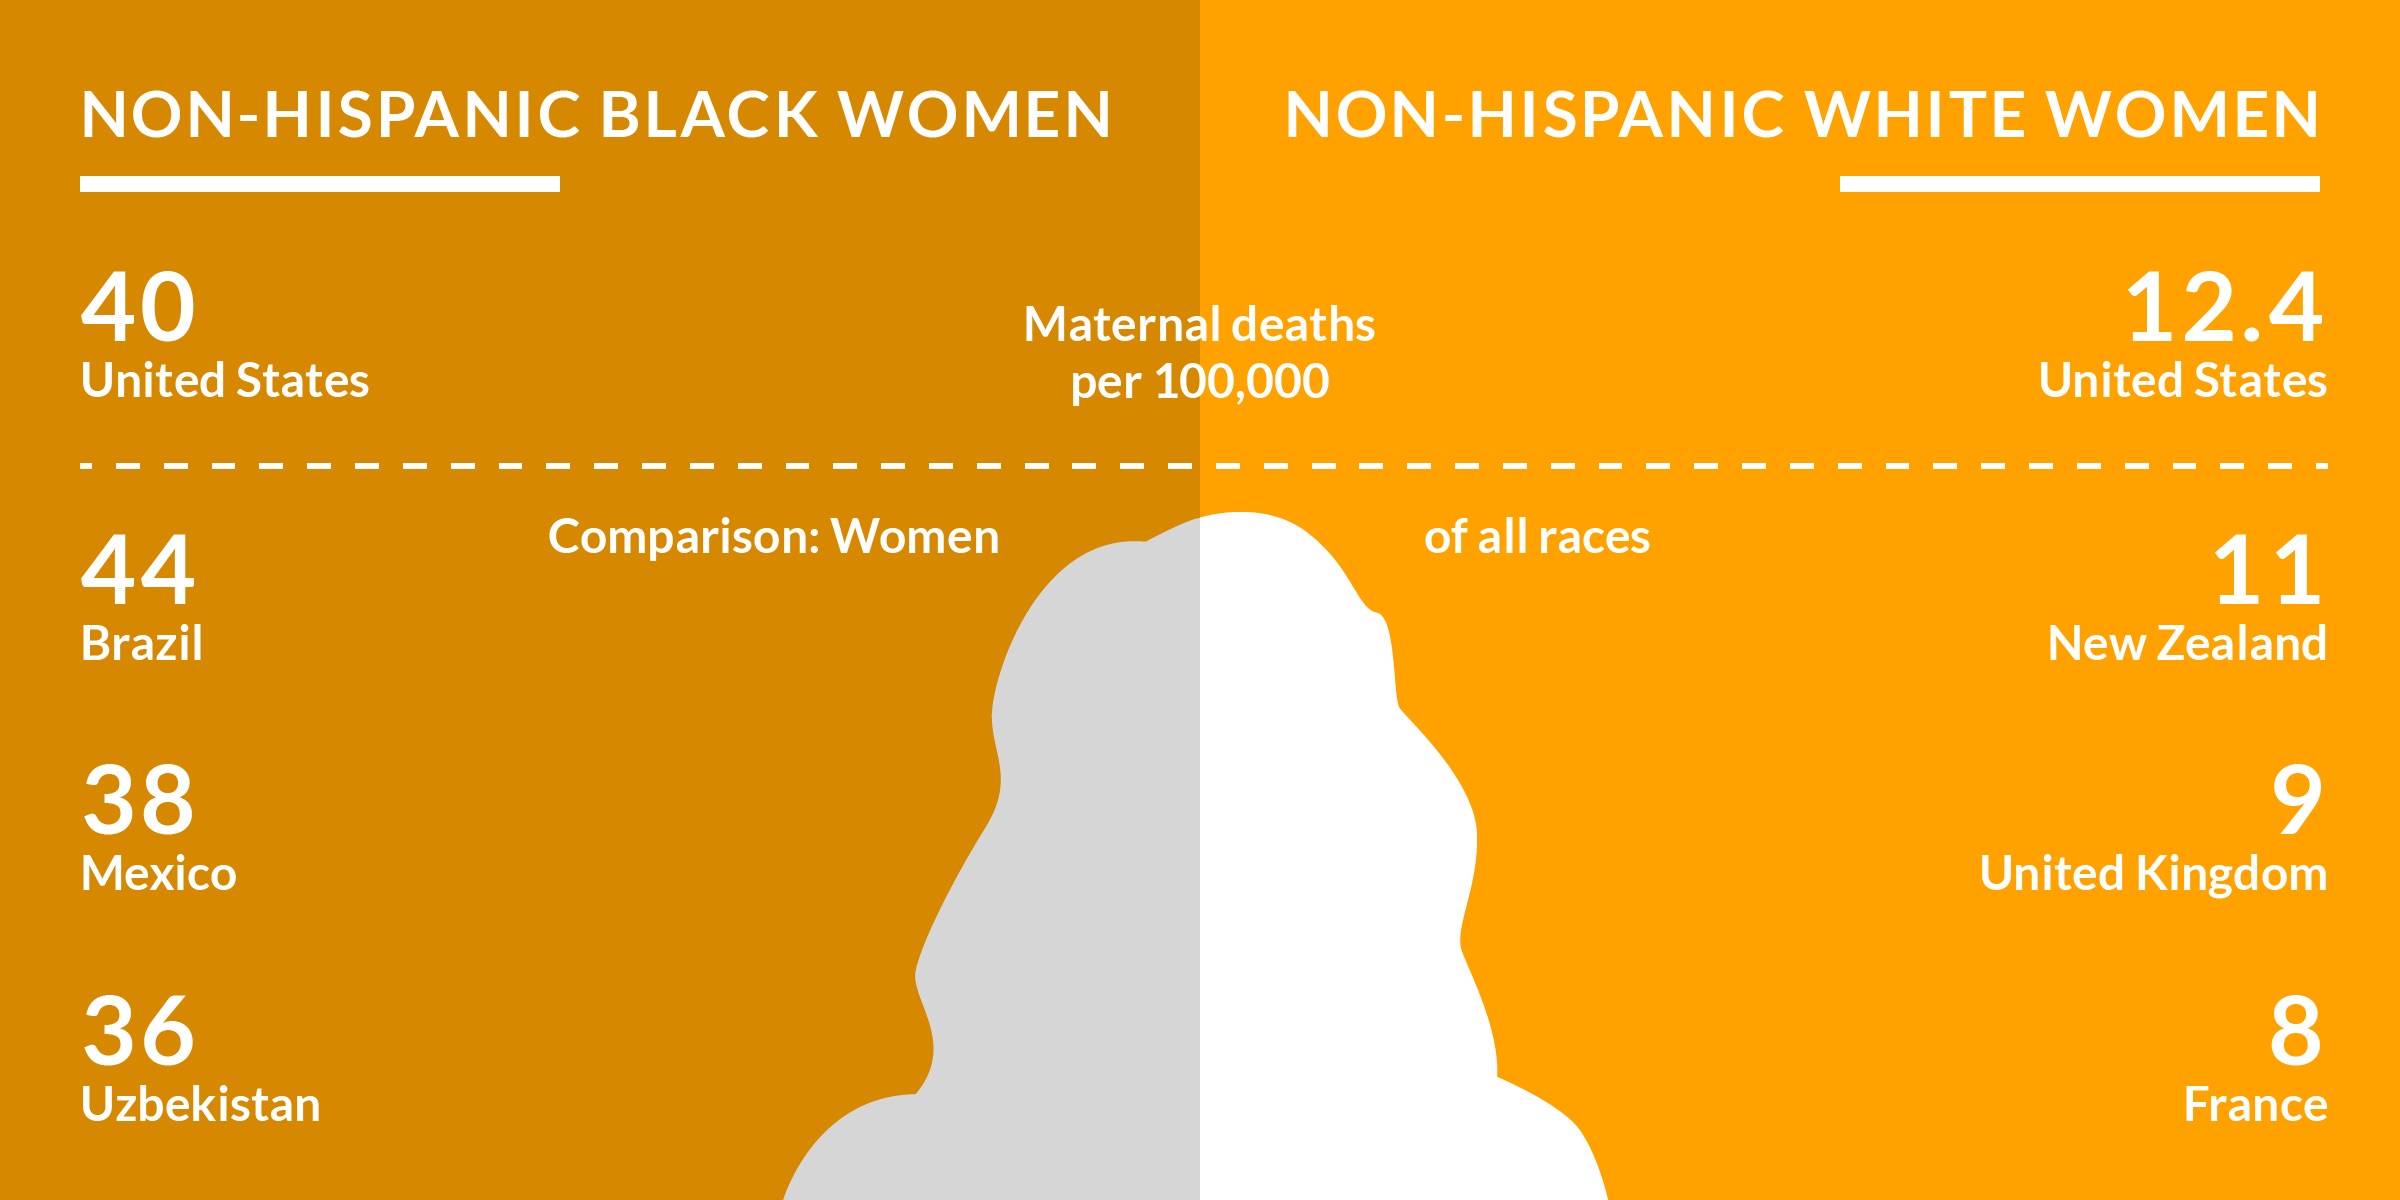 A visual labeled "non-Hispanic black women" on the left and "non-Hispanic white women" on the right. A series of stats are given for maternal deaths per 100,000 women. For every 100,000 non-Hispanic black women in the United States, there are 40 maternal deaths compared to 12.4 maternal deaths for non-Hispanic white women. Aggregate numbers out of 100,000 for women of all races are given in the bottom half of the graphic. 44 for Brazil, 38 for Mexico, 36 for Uzbekistan, 11 for New Zealand, 9 for the UK, and 8 for France.